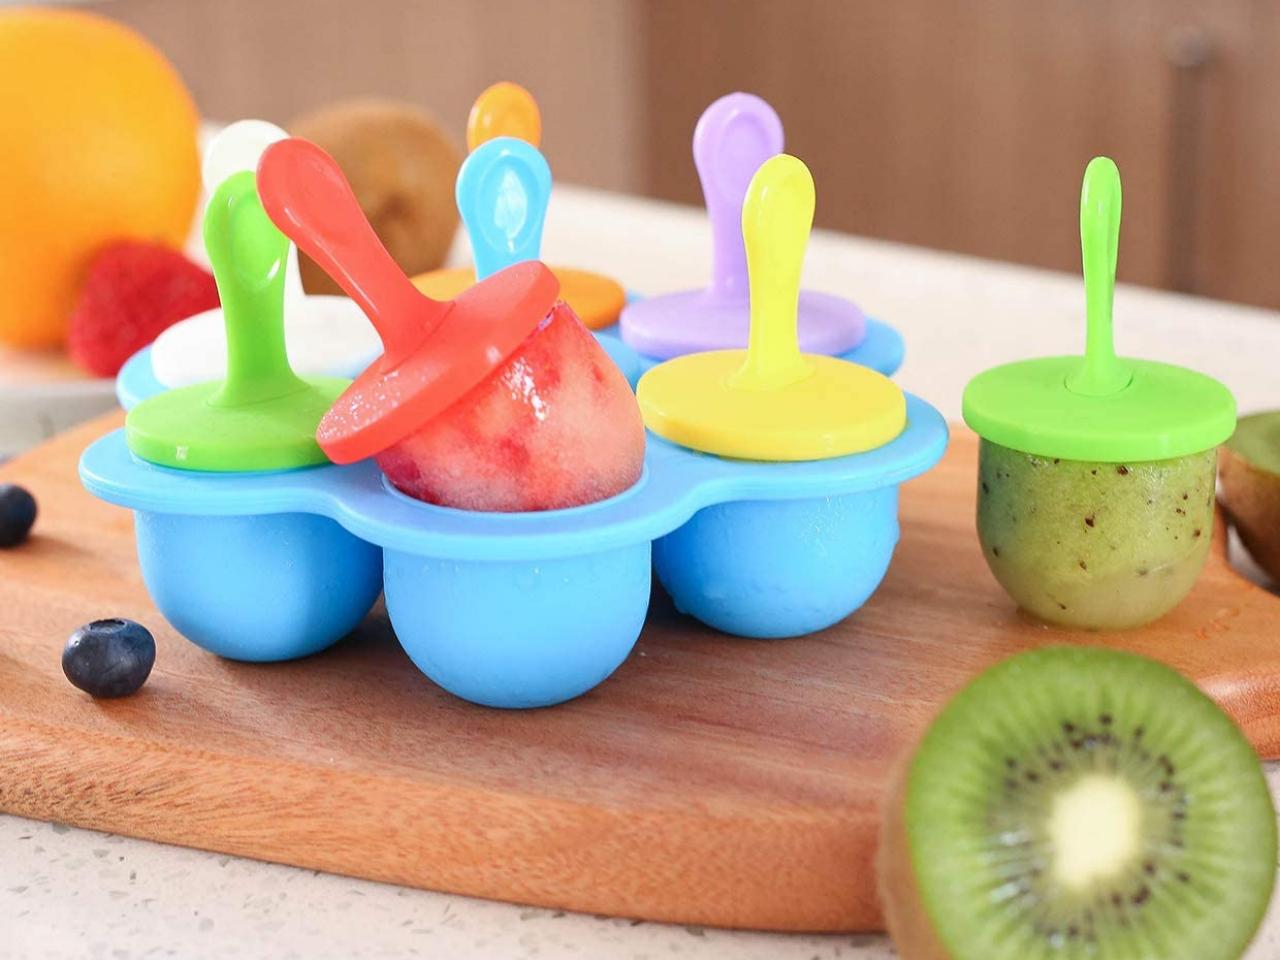 Best Selling Silicone Popsicle Molds Maker Large Homemade Ice Pop